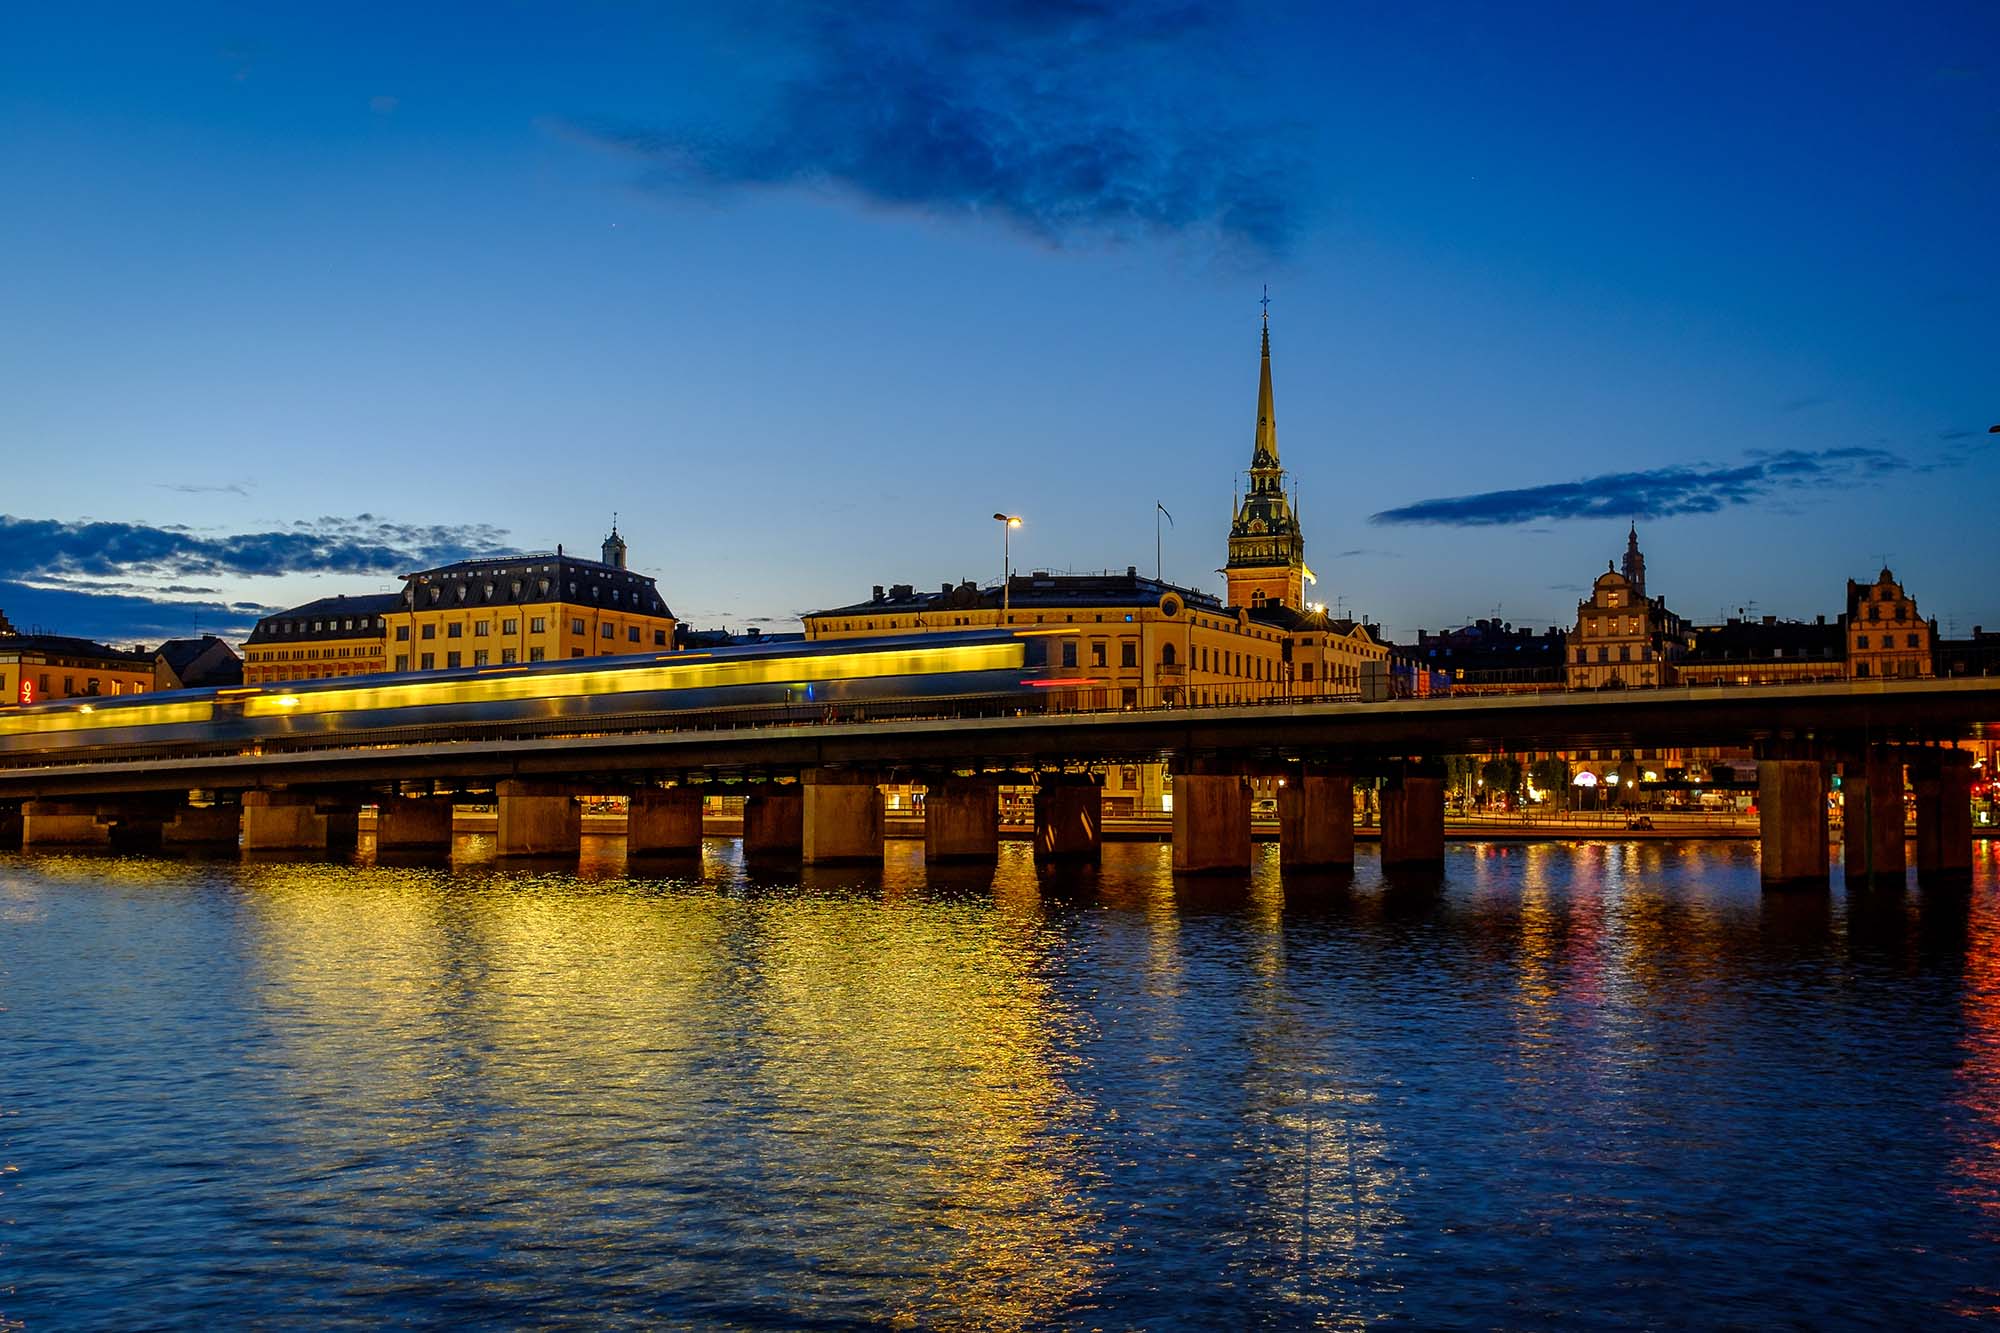 Trains running over a bridge in Stockholm